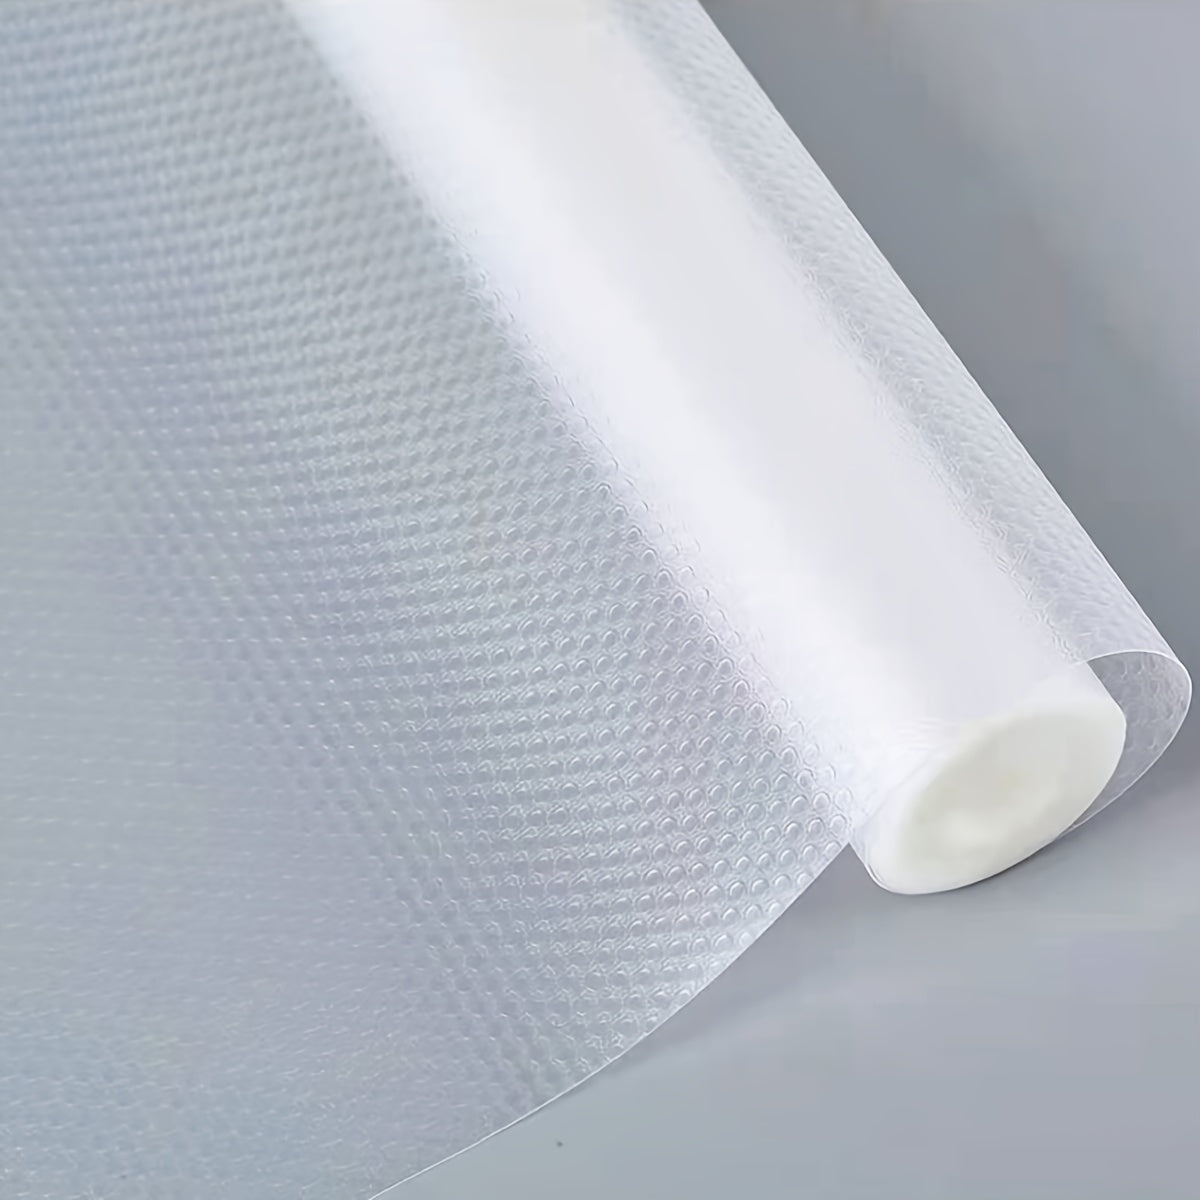 Non-Adhesive Shelf Liners Roll - Waterproof and Non-Slip for Kitchen Cabinets and Drawers